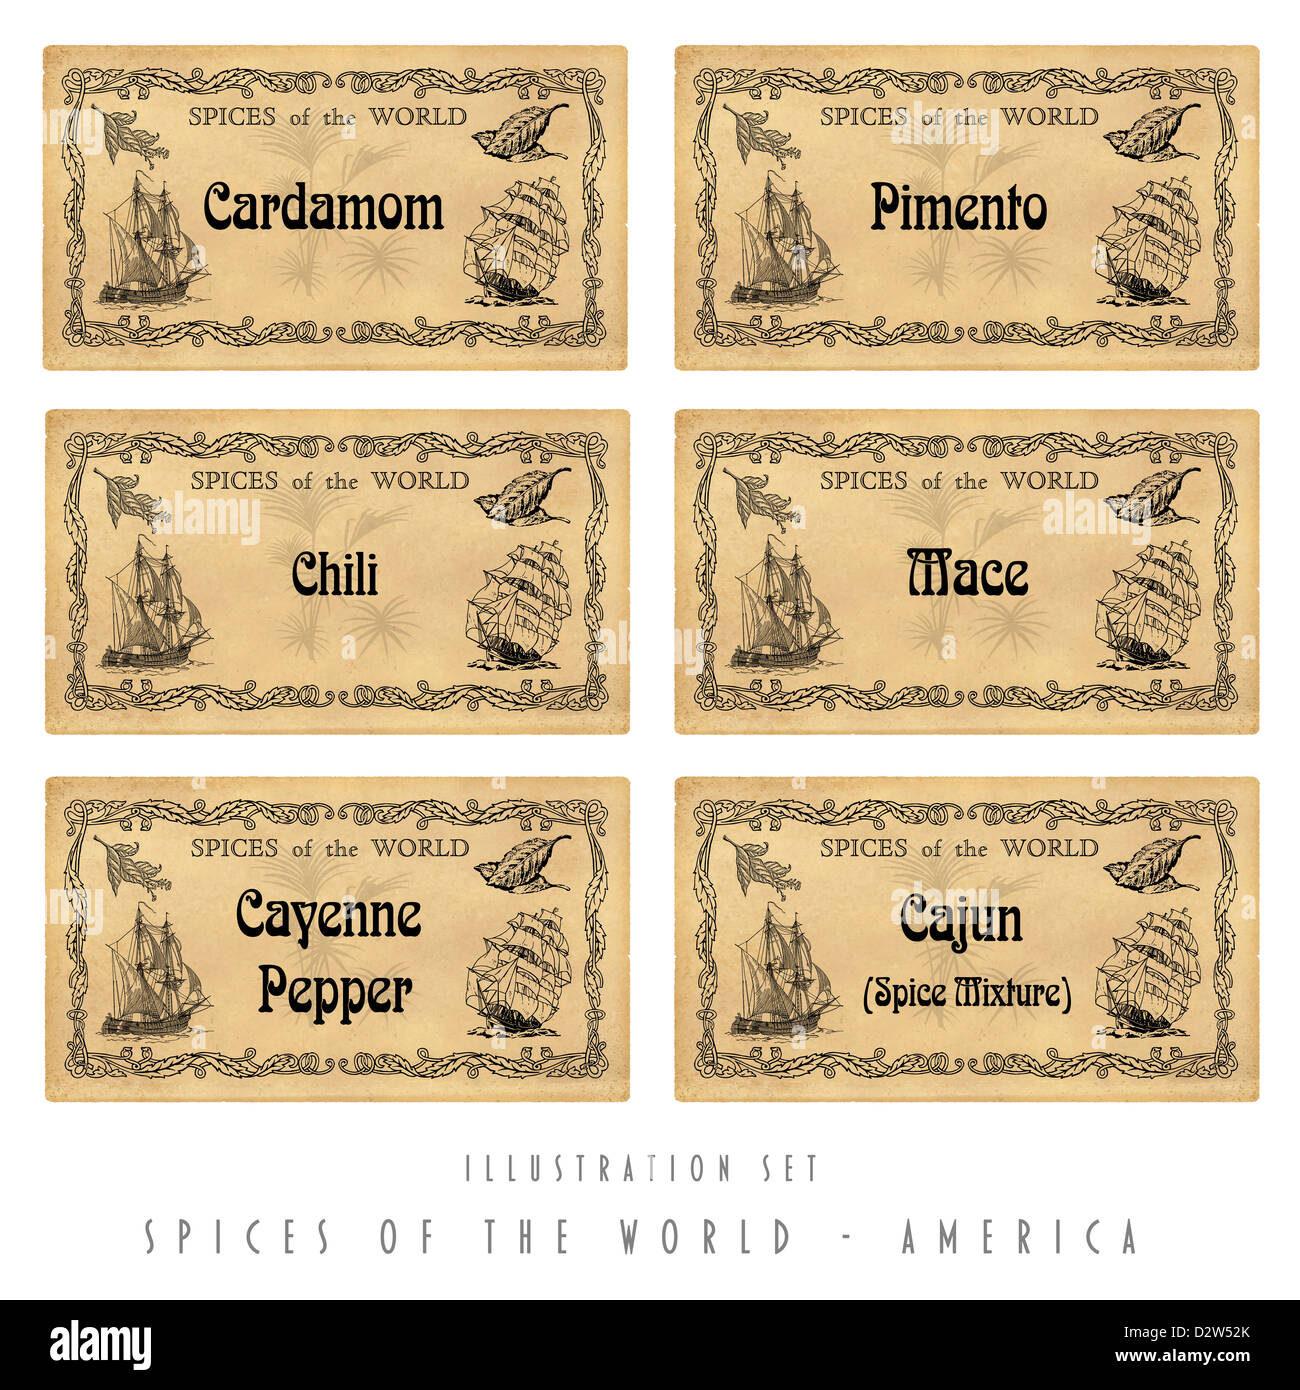 Illustration set with six spice labels, America Stock Photo